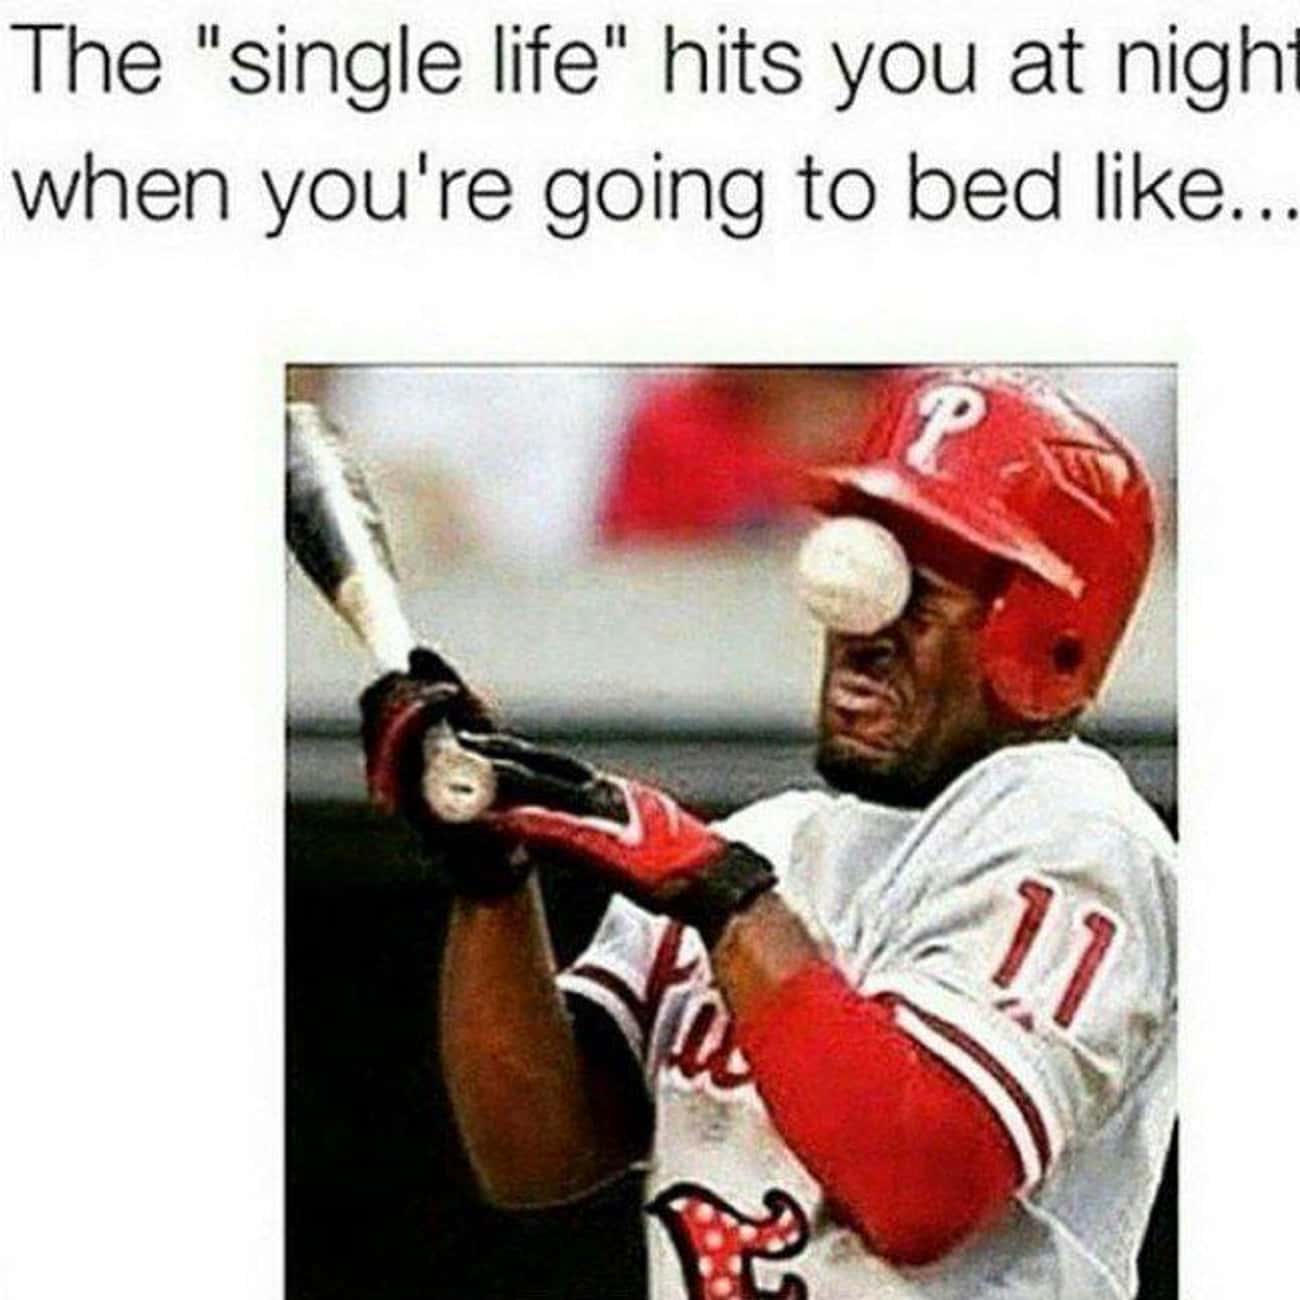 26 Spot-On Memes For Single People